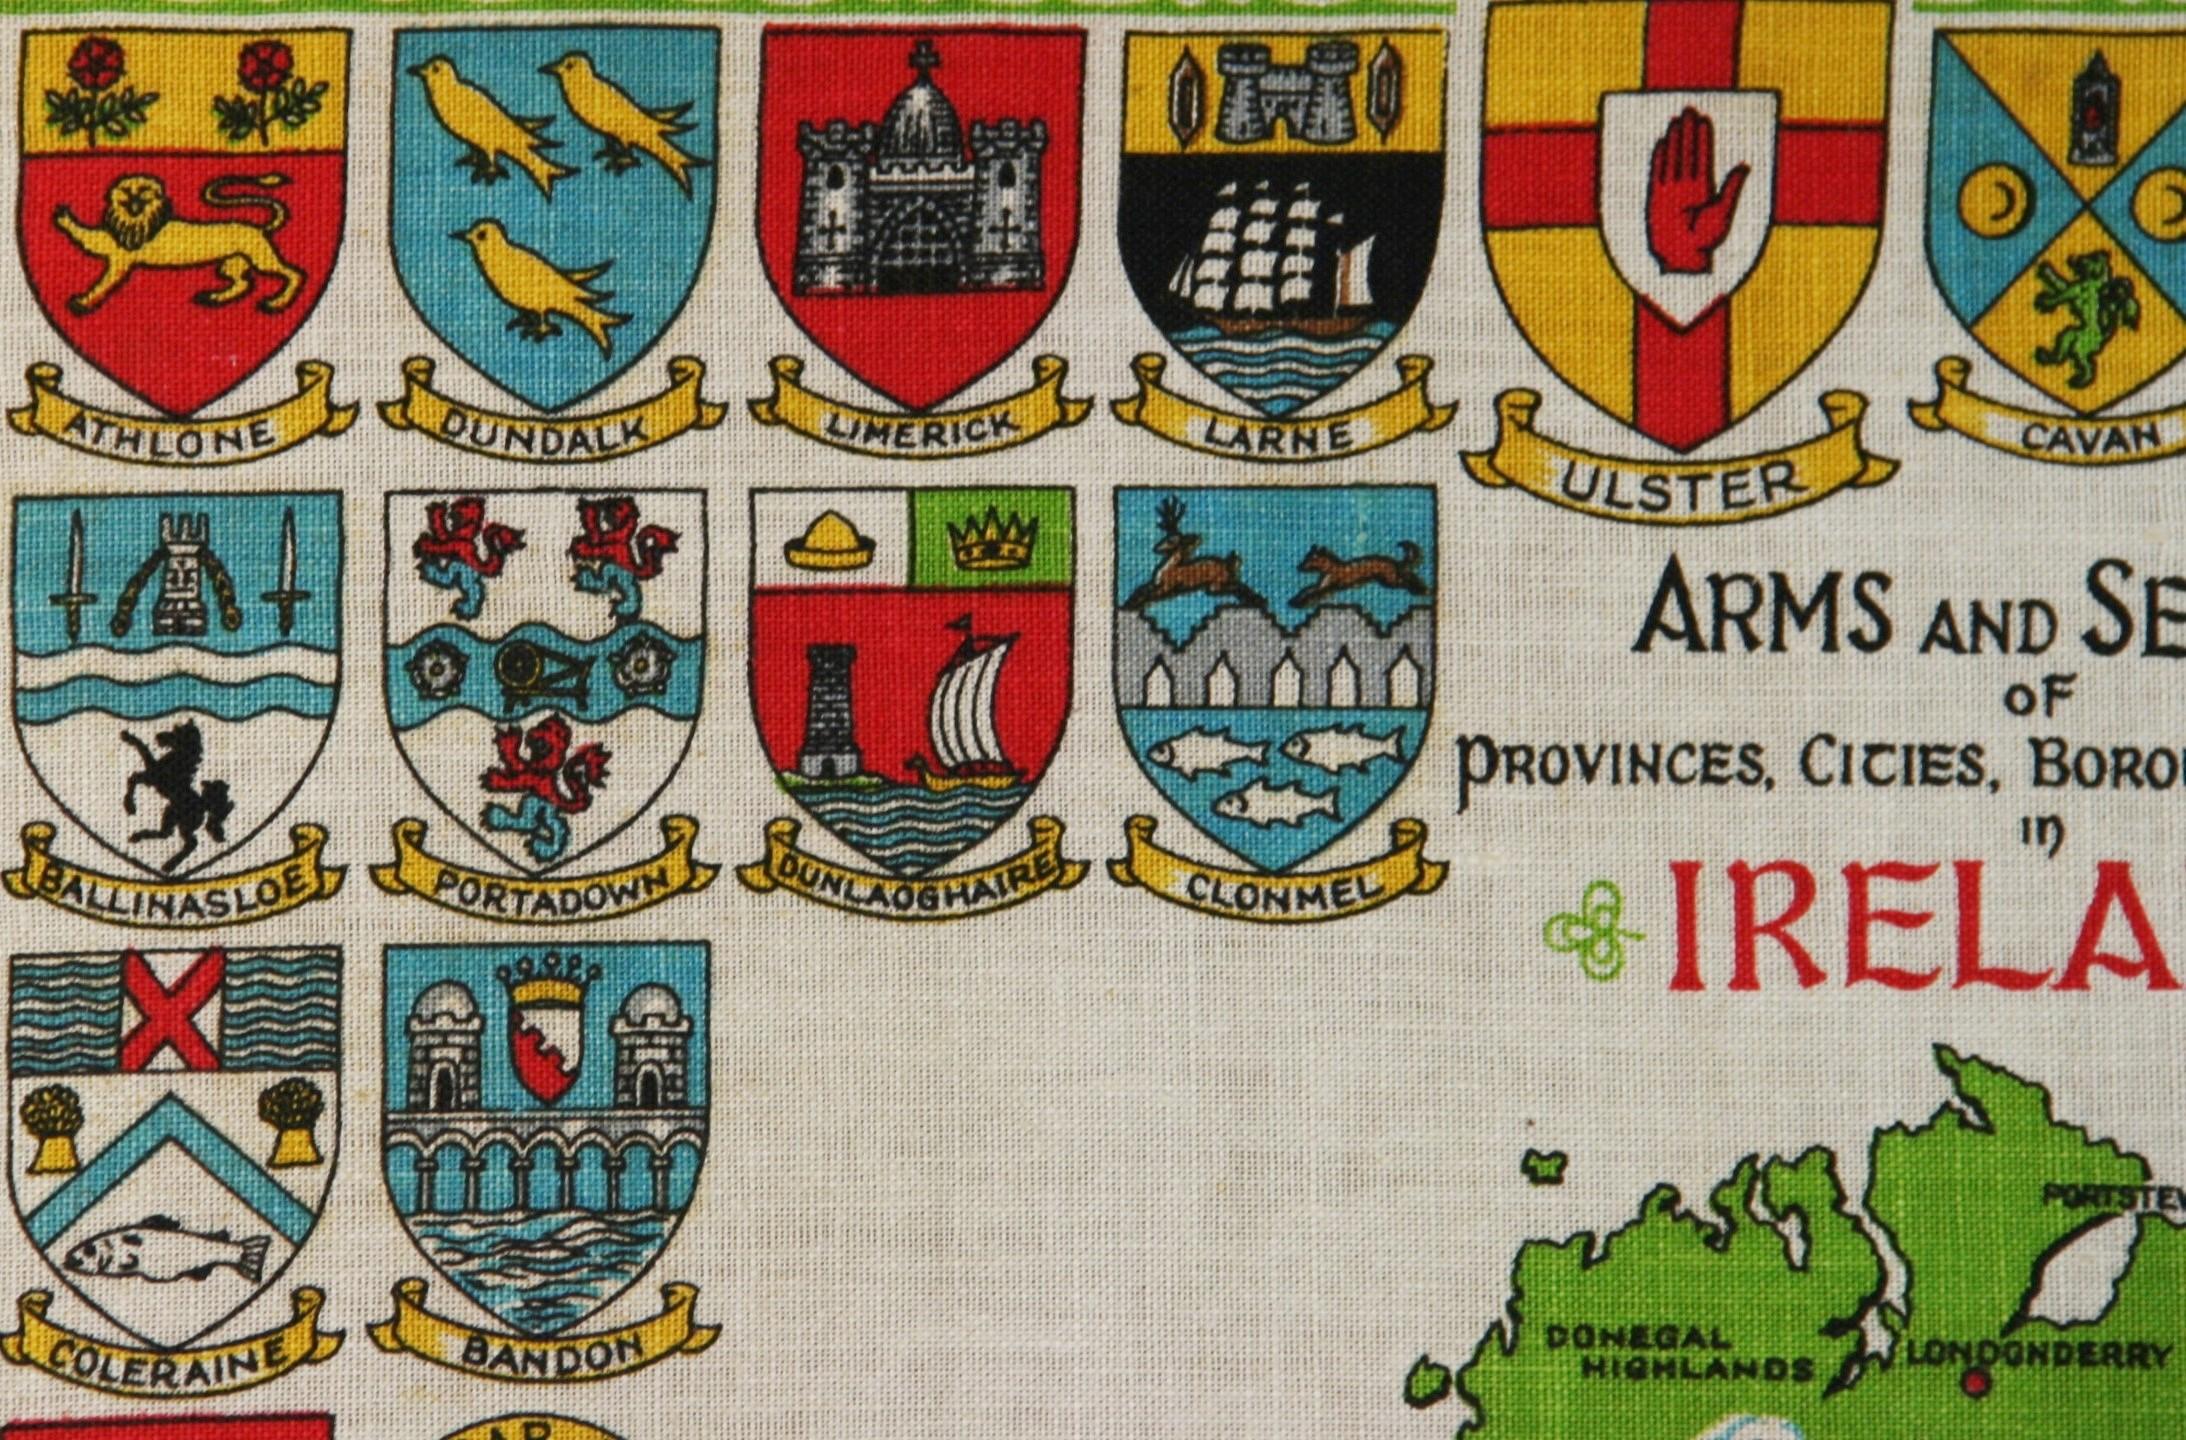 Arms And Seals of Cities in Ireland Landscape On Linen 4